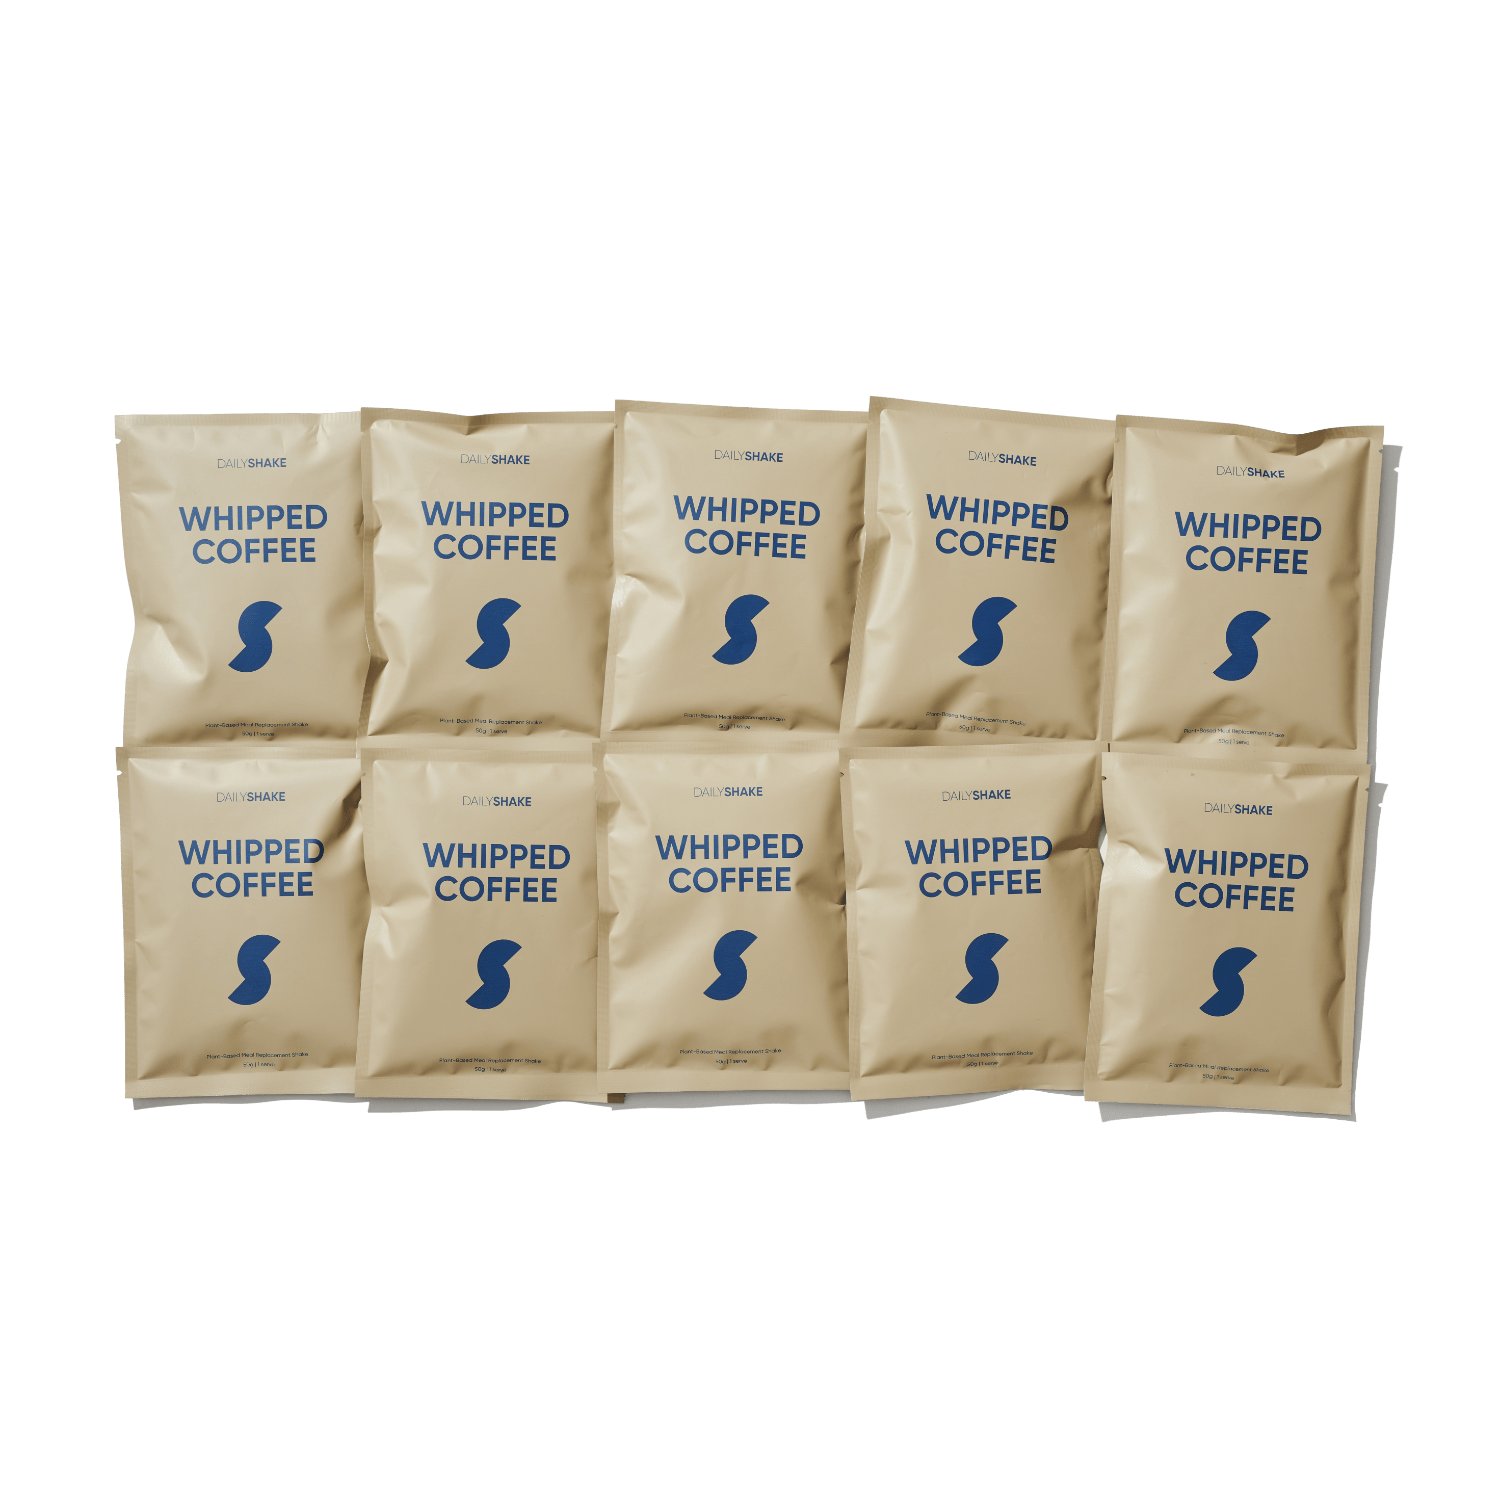 Whipped Coffee Daily Shake - Premium Meal Replacement Shakes 10 x Whipped Coffee Single Sachet Pack